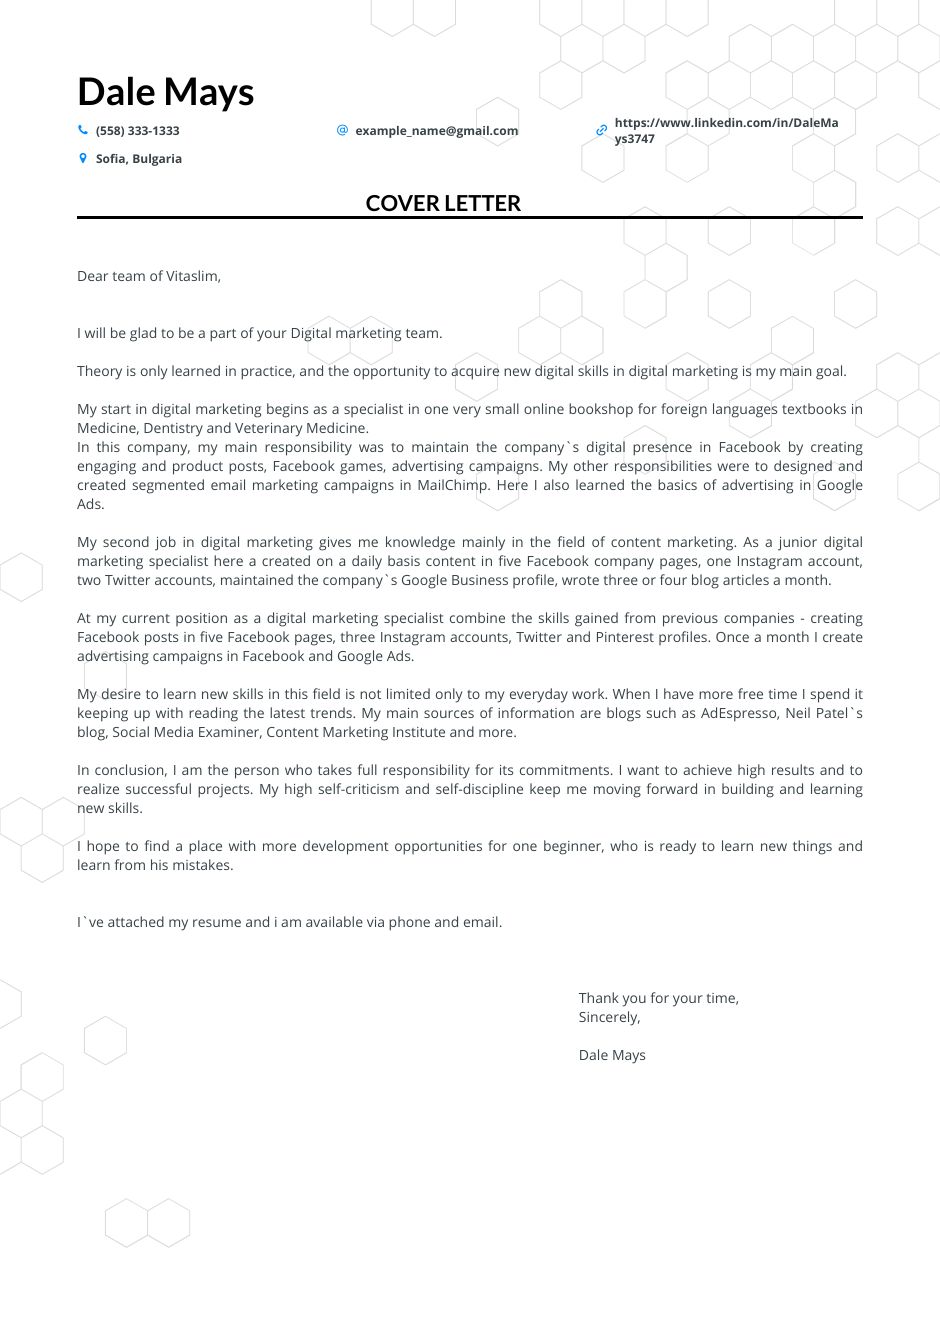 social-media-specialist-coverletter.png